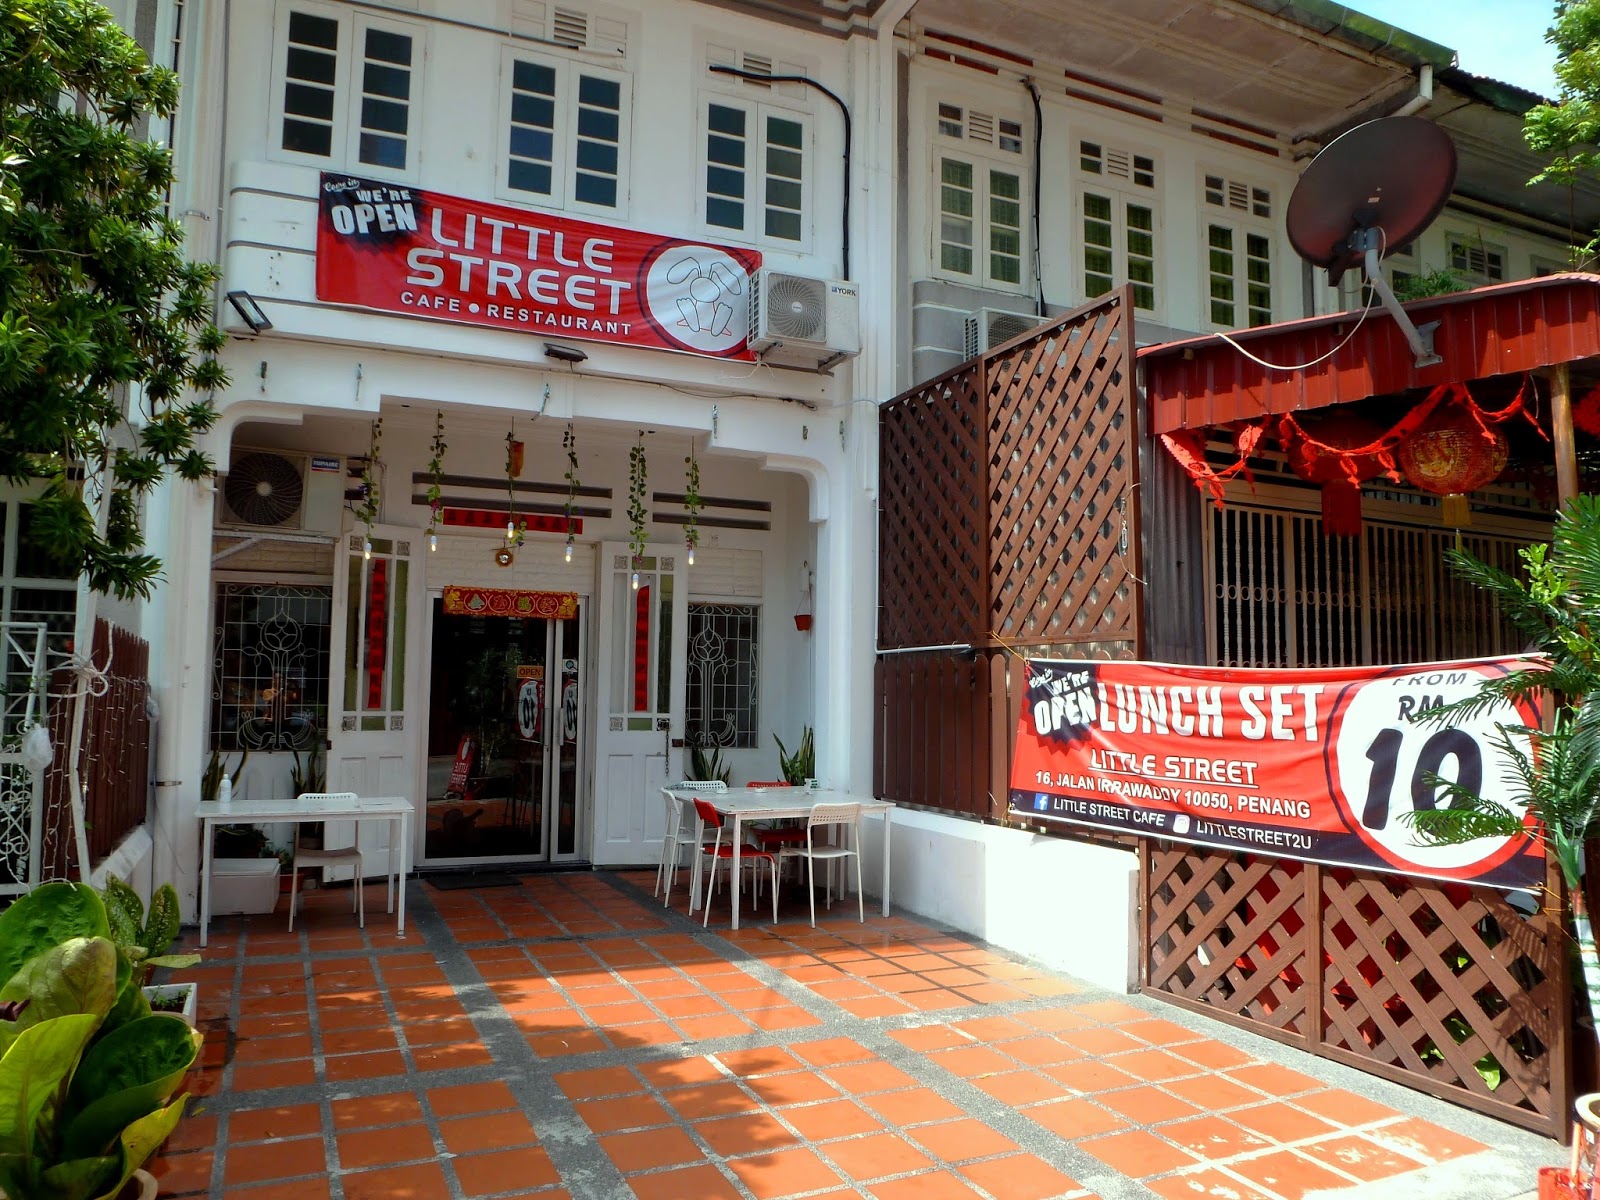 Penang Food For Thought: Little Street